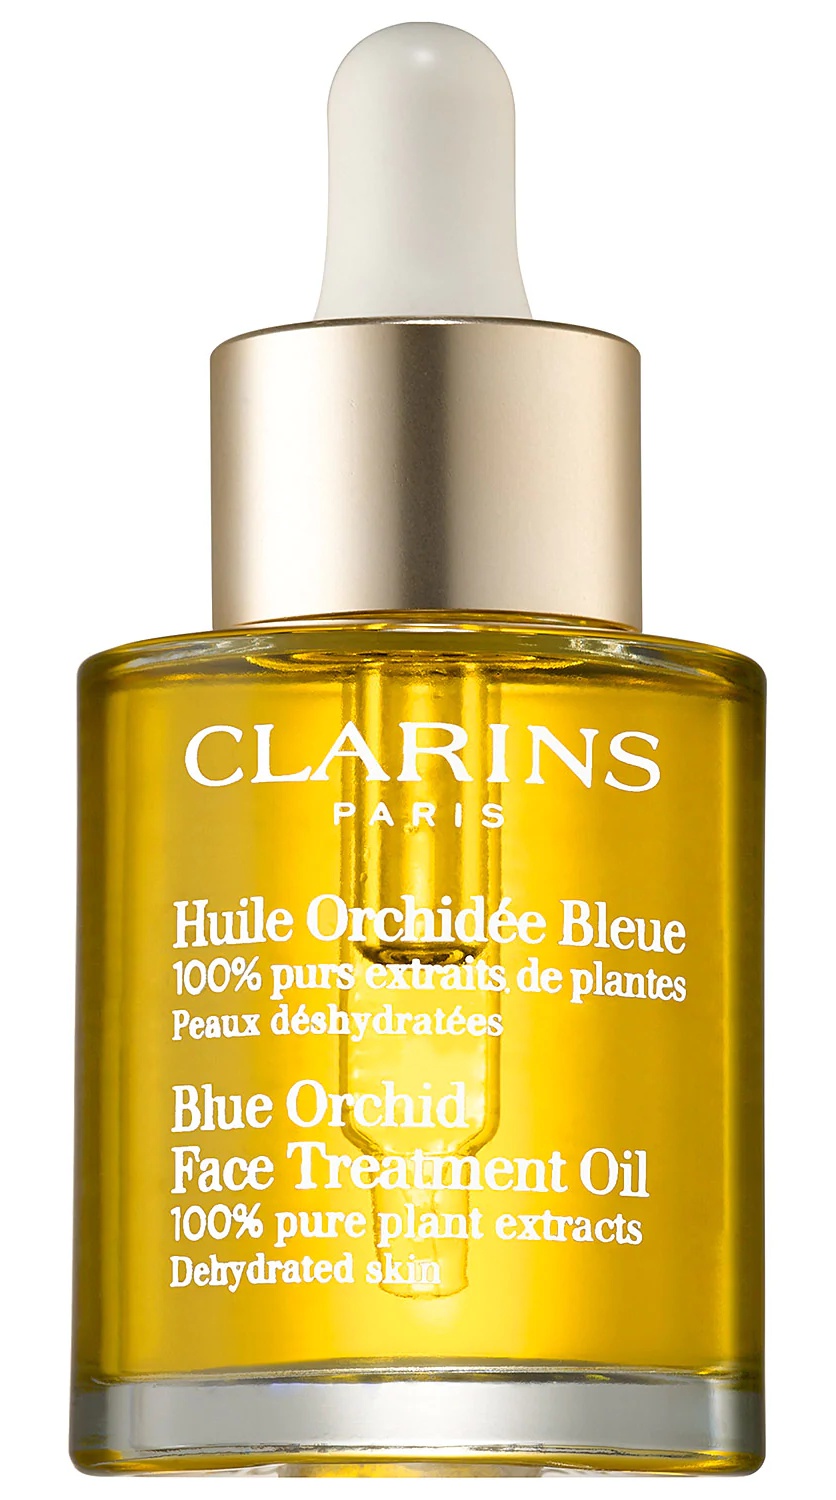 Clarins Blue Orchid Facial Treatment Oil